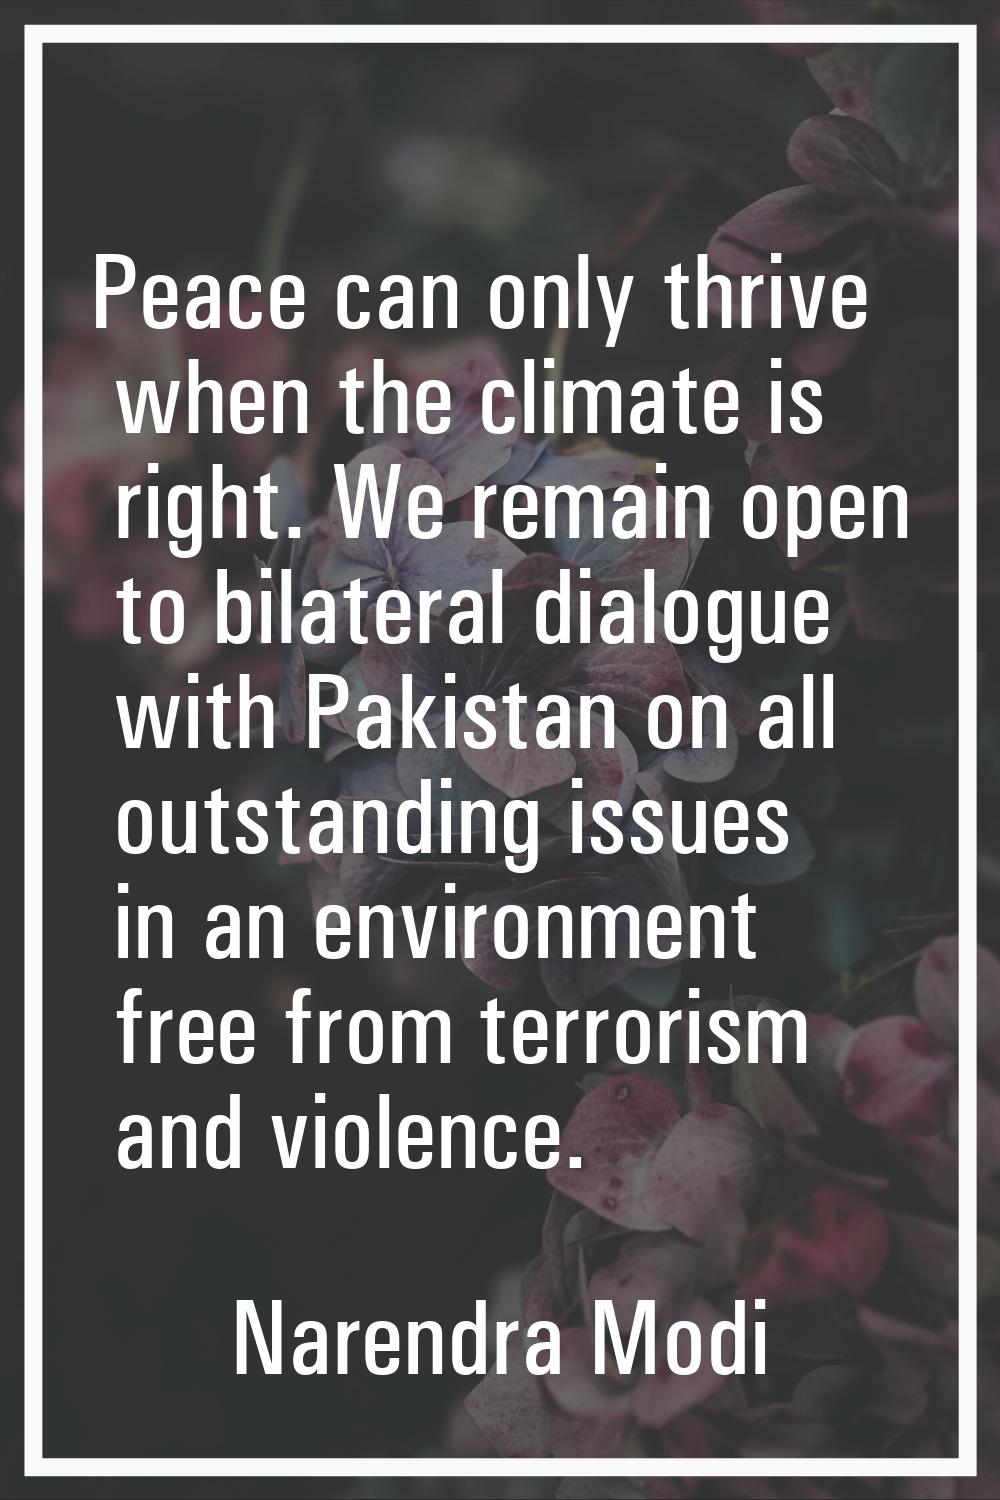 Peace can only thrive when the climate is right. We remain open to bilateral dialogue with Pakistan